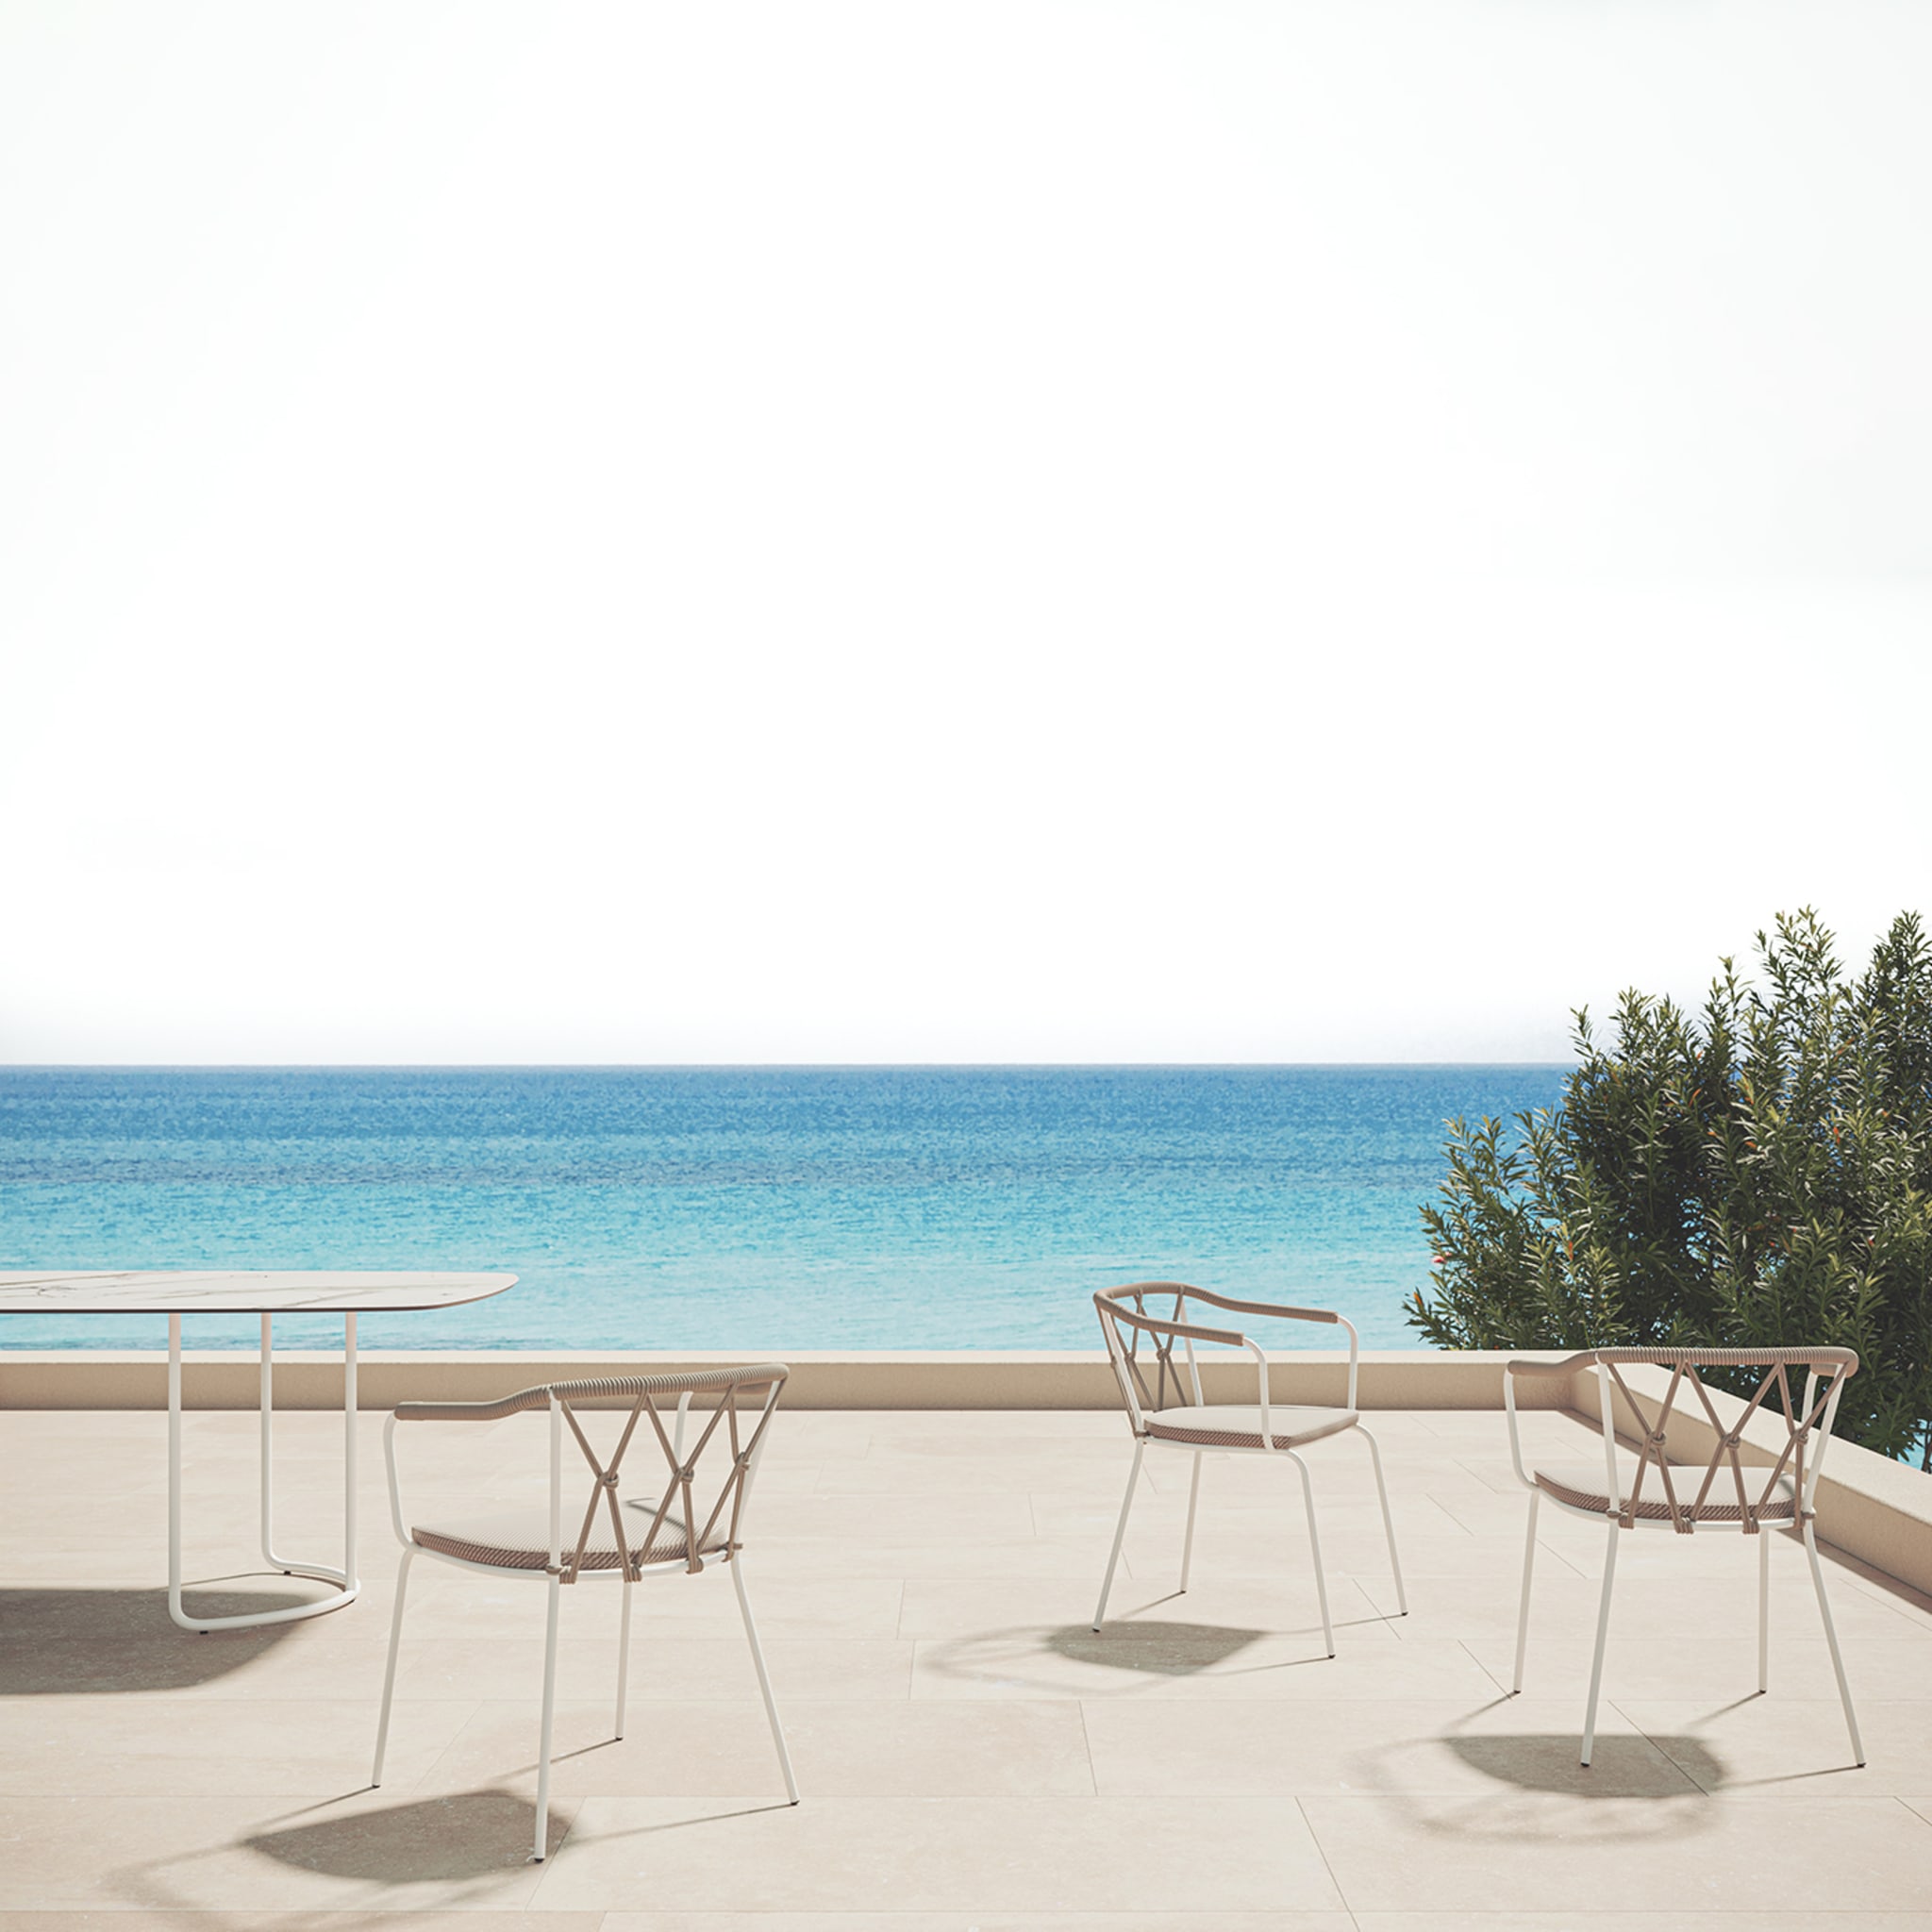 Scala Small Beige Outdoor Chair by Marco Piva - Alternative view 2